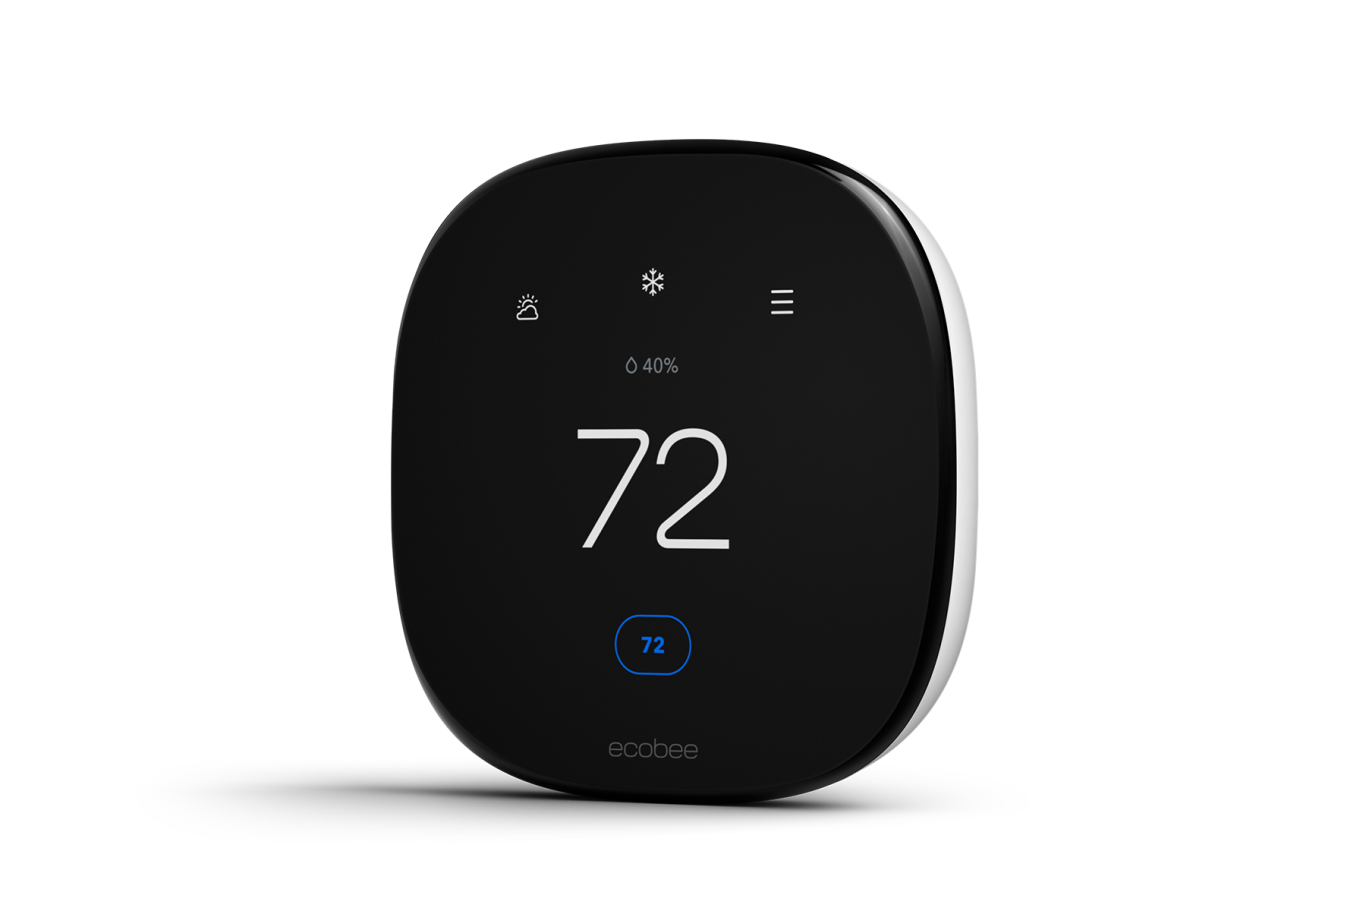 Three-quarter view of the ecobee smart thermostat enhanced